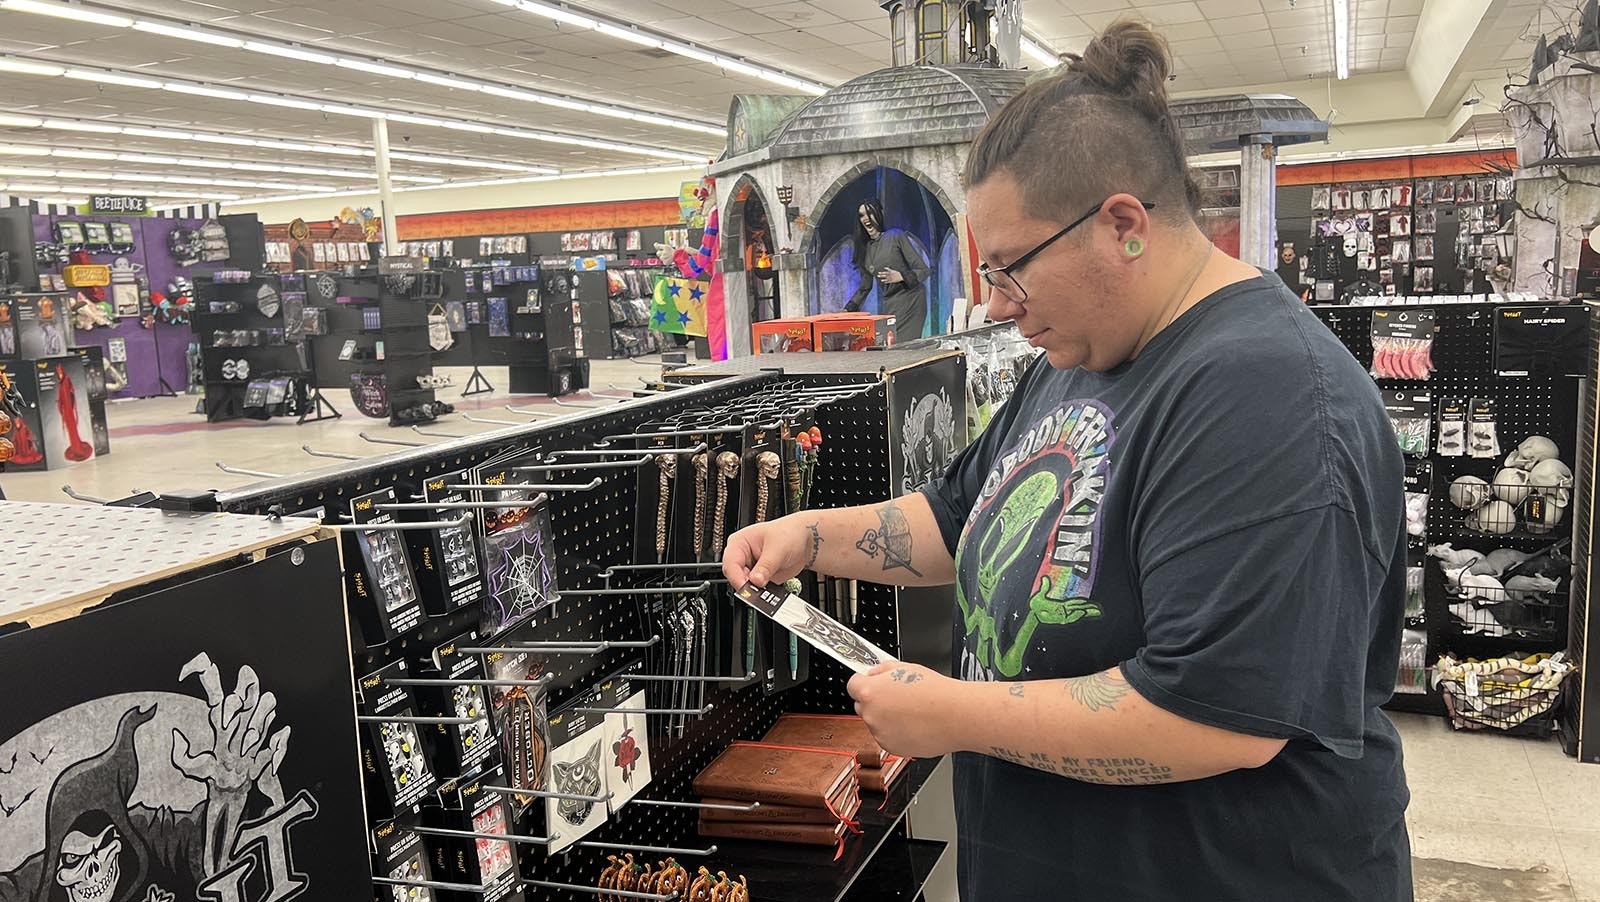 Kayla Hall checks out some spooky stickers at the Spirit Halloween store in Cheyenne on Thursday.